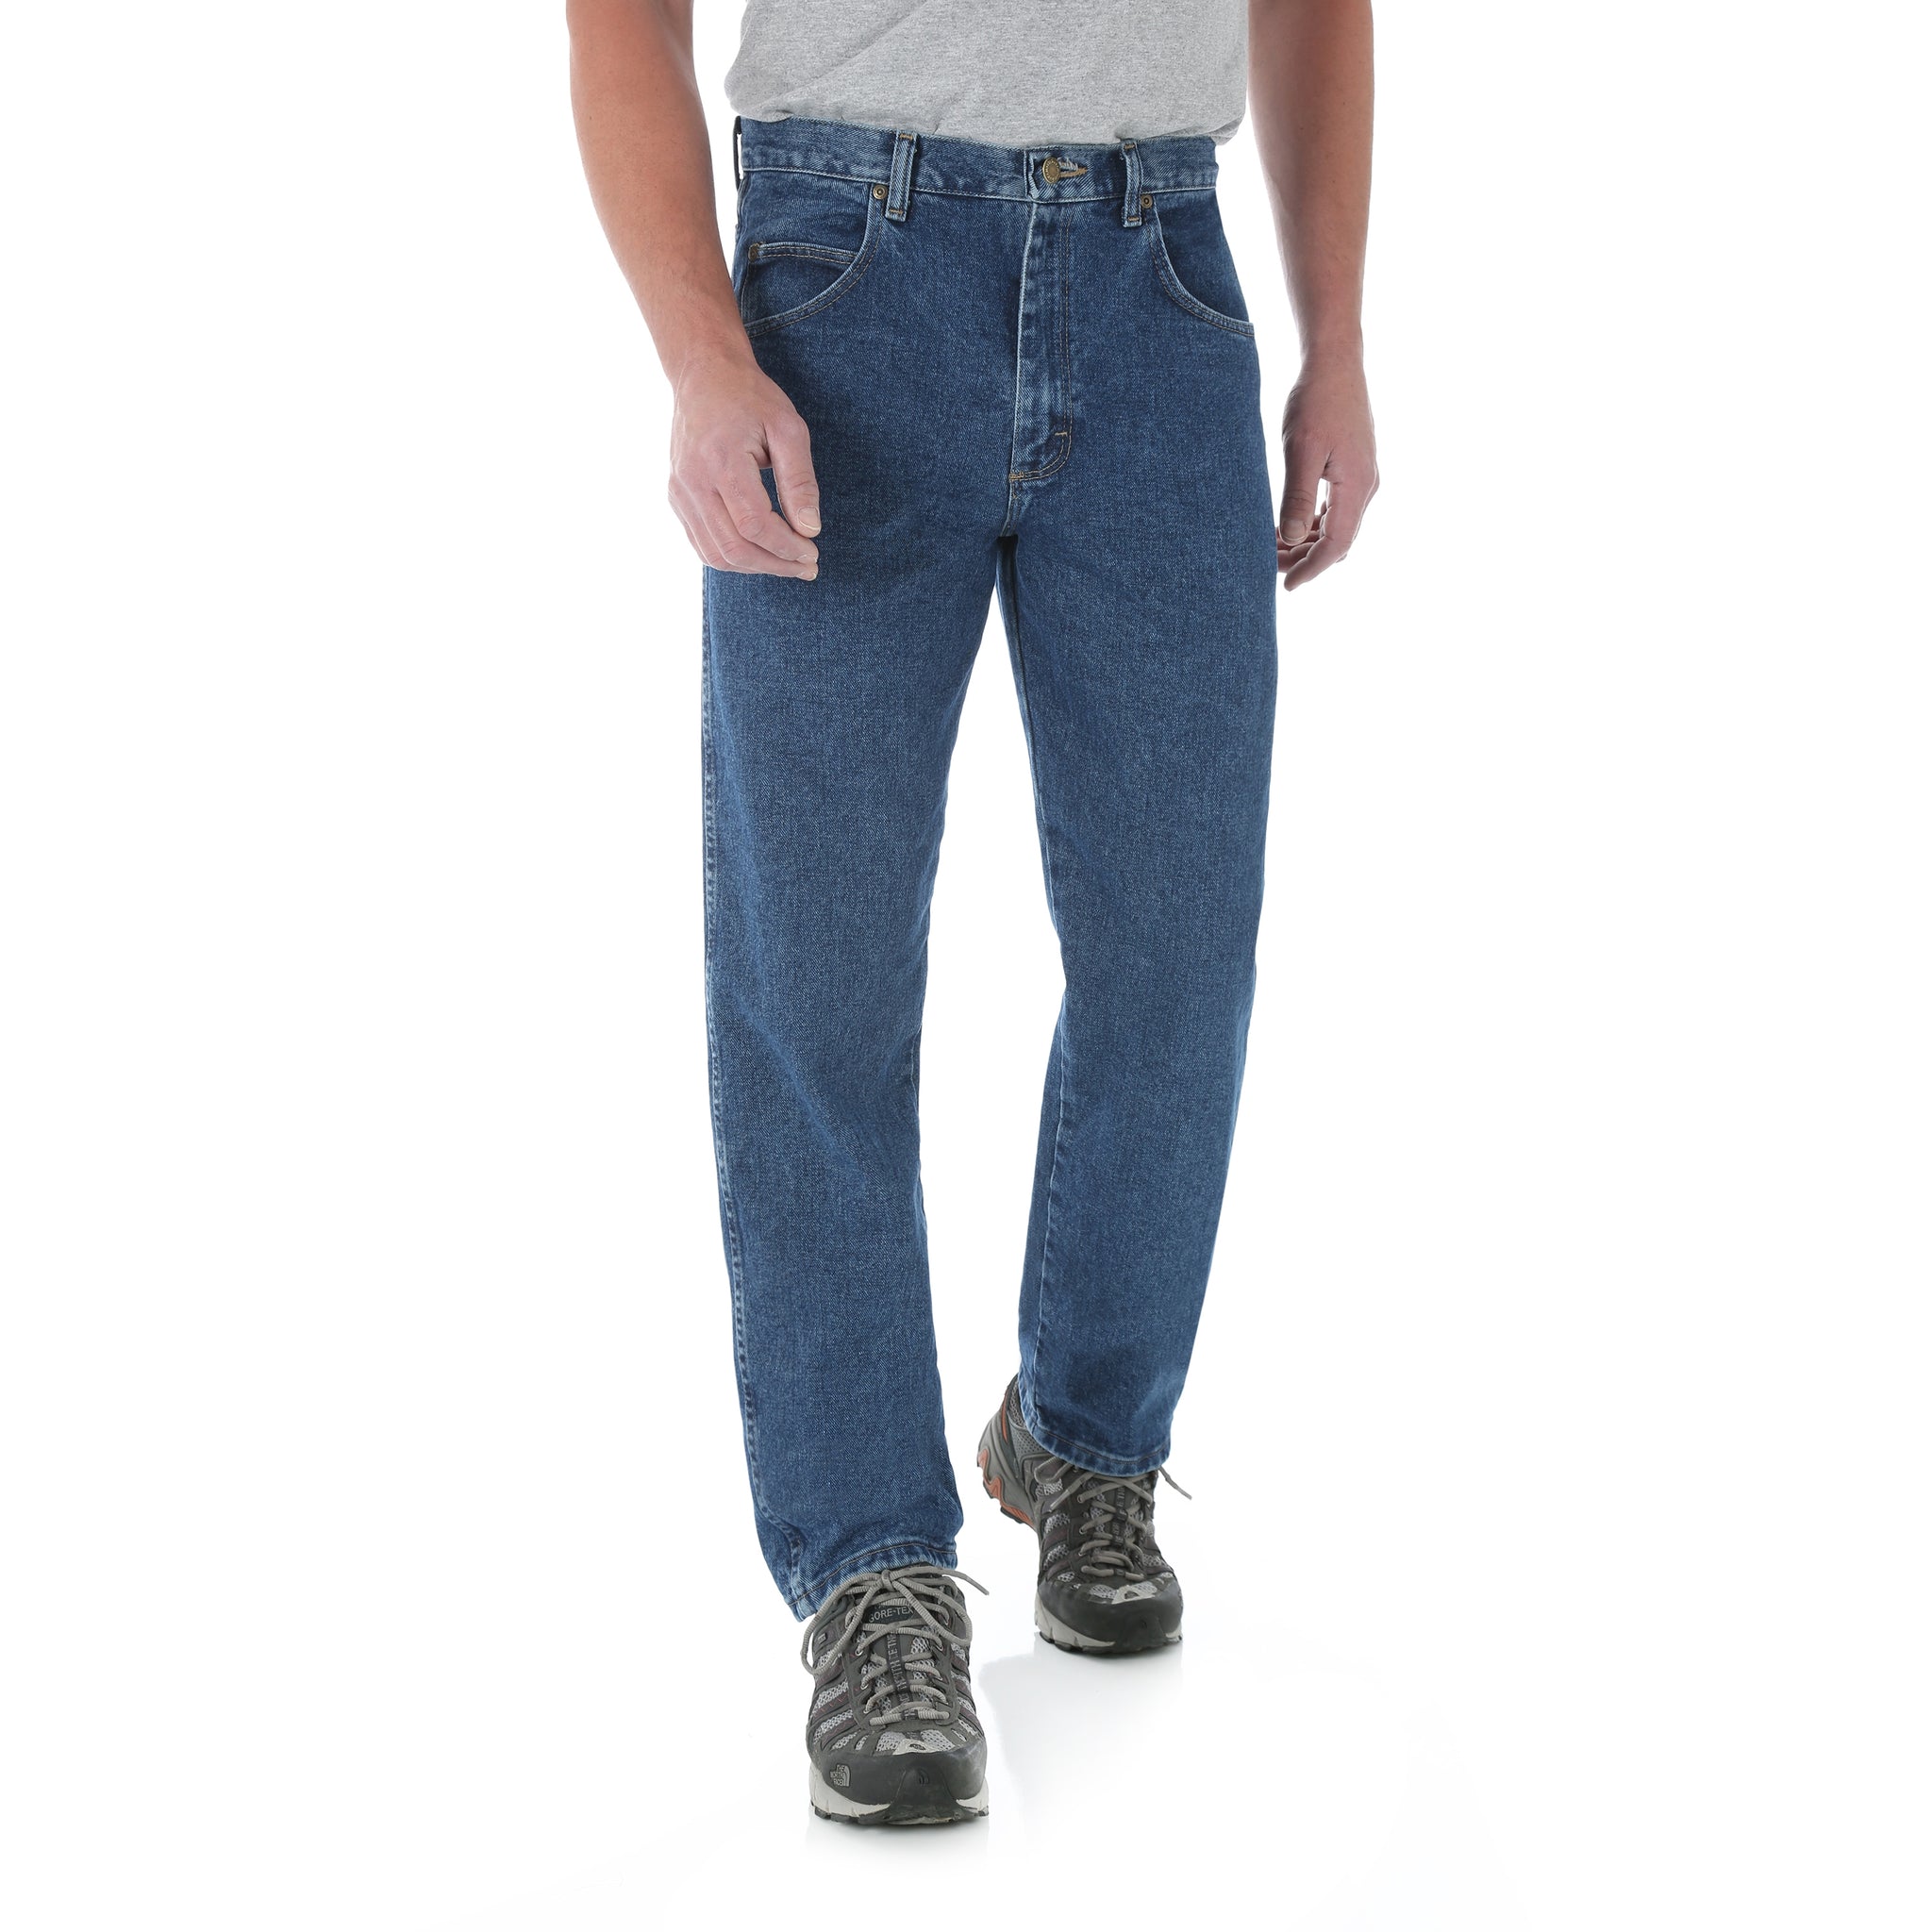 Wrangler Men's Rugged Wear Relaxed Fit Jeans – Good's Store Online